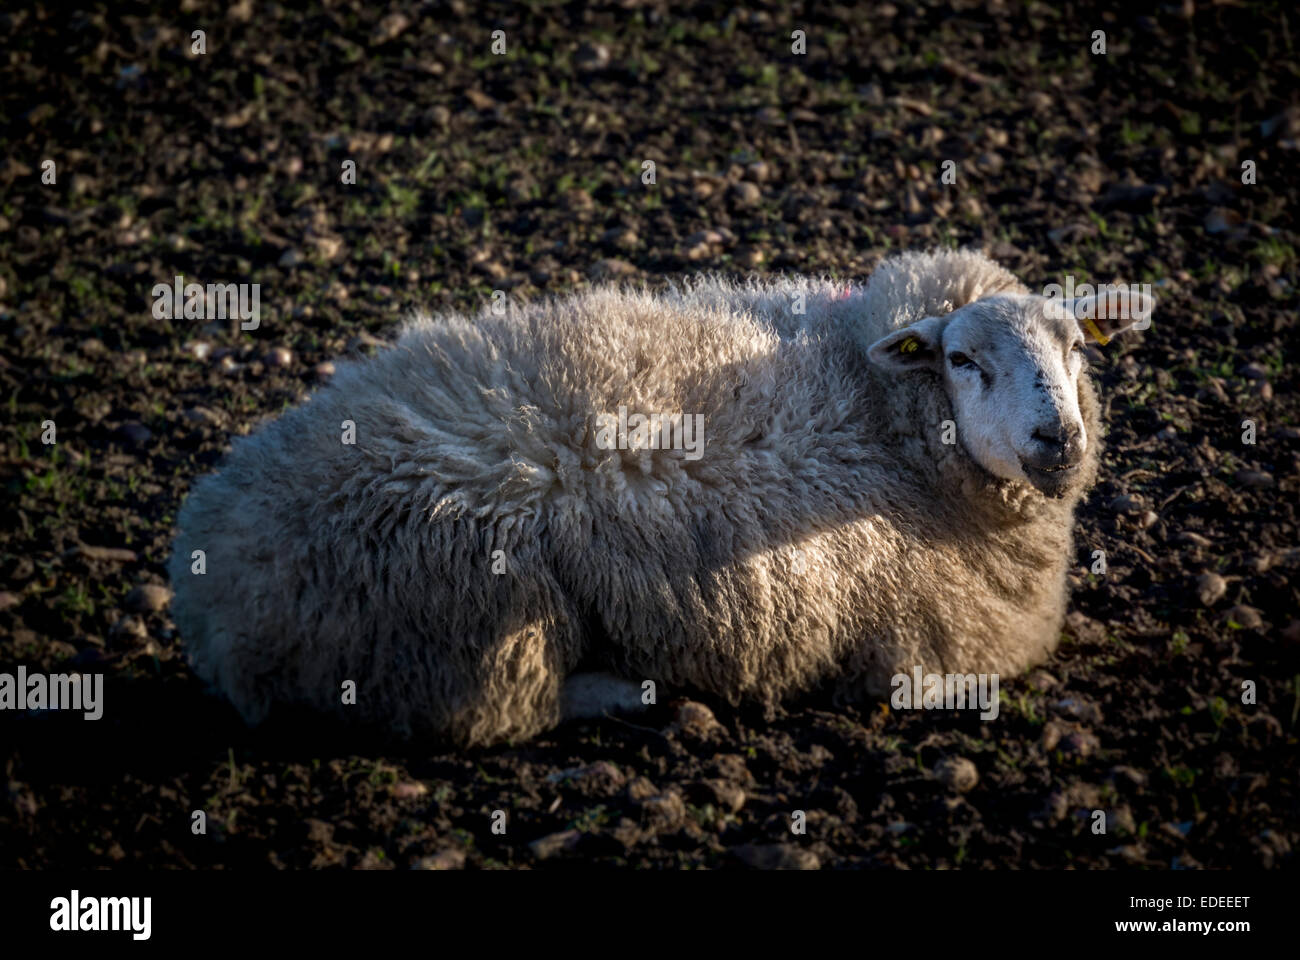 Sheep Outdoors in Winter Stock Photo